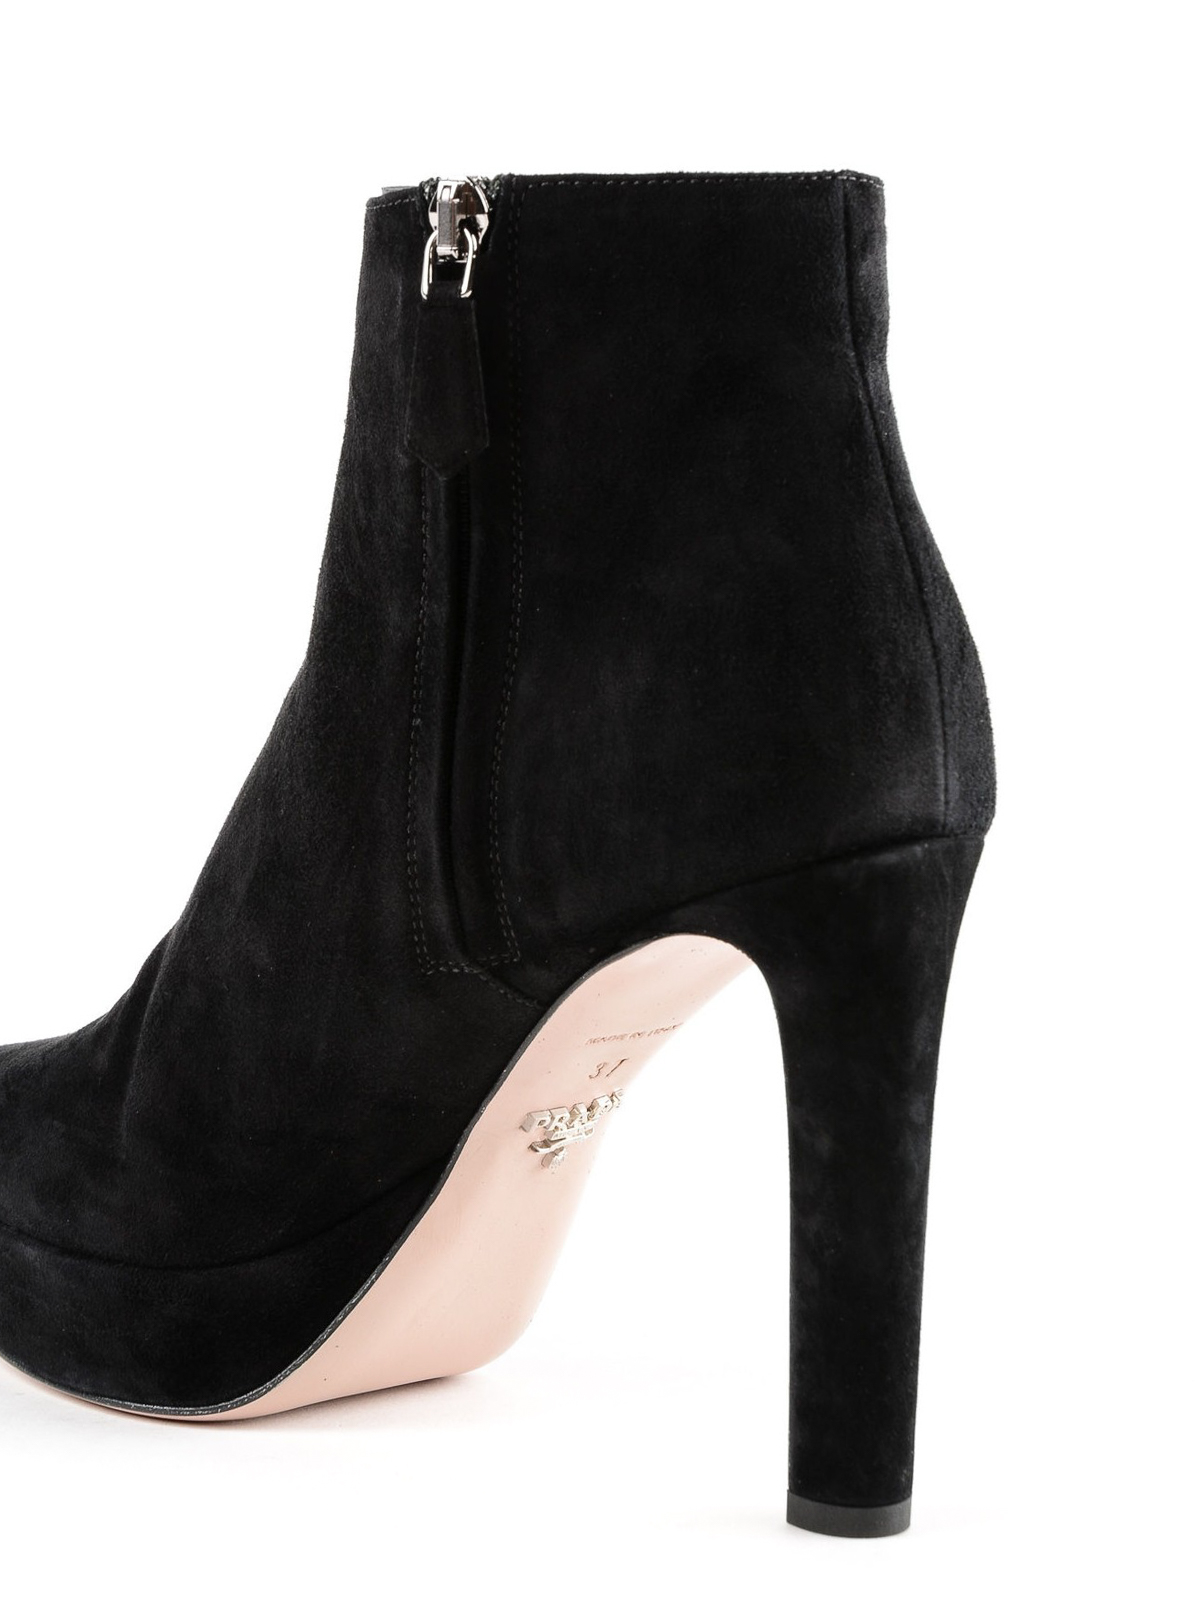 suede platform booties - ankle boots 